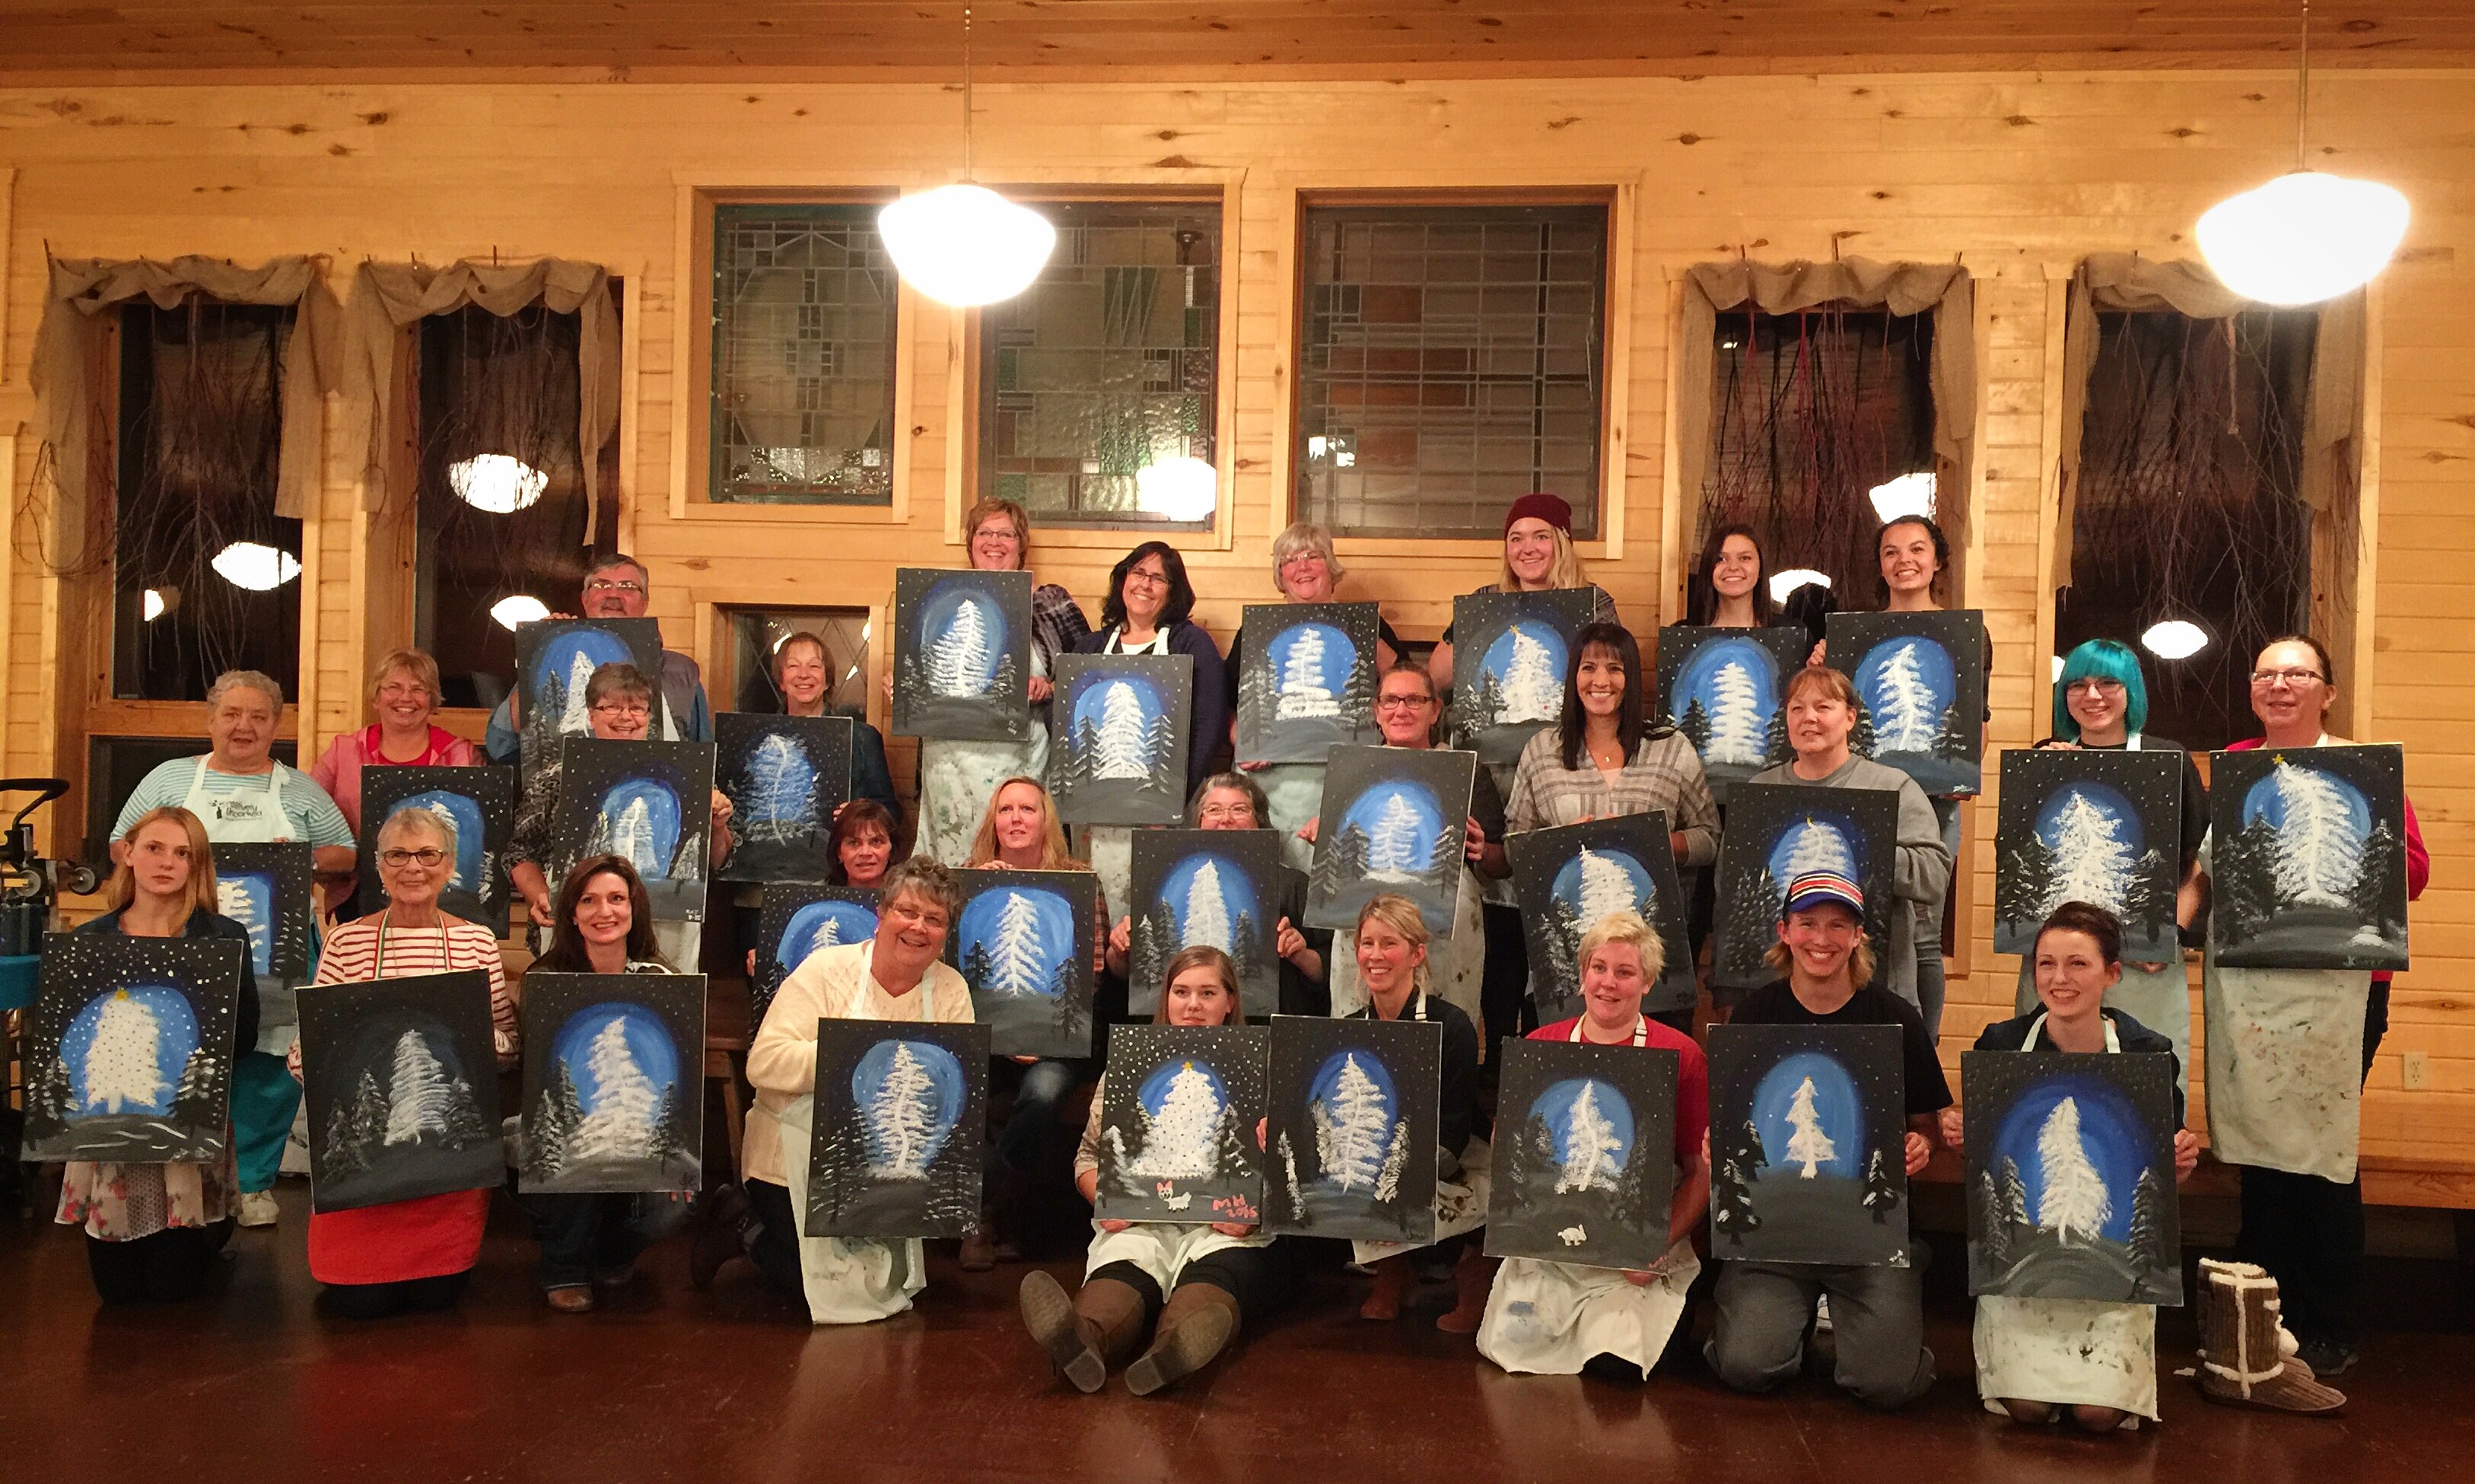 Maplelag team members with finished paintings after an evening with "Creatively Uncorked" for last nights staff party. November 10th, 2015.